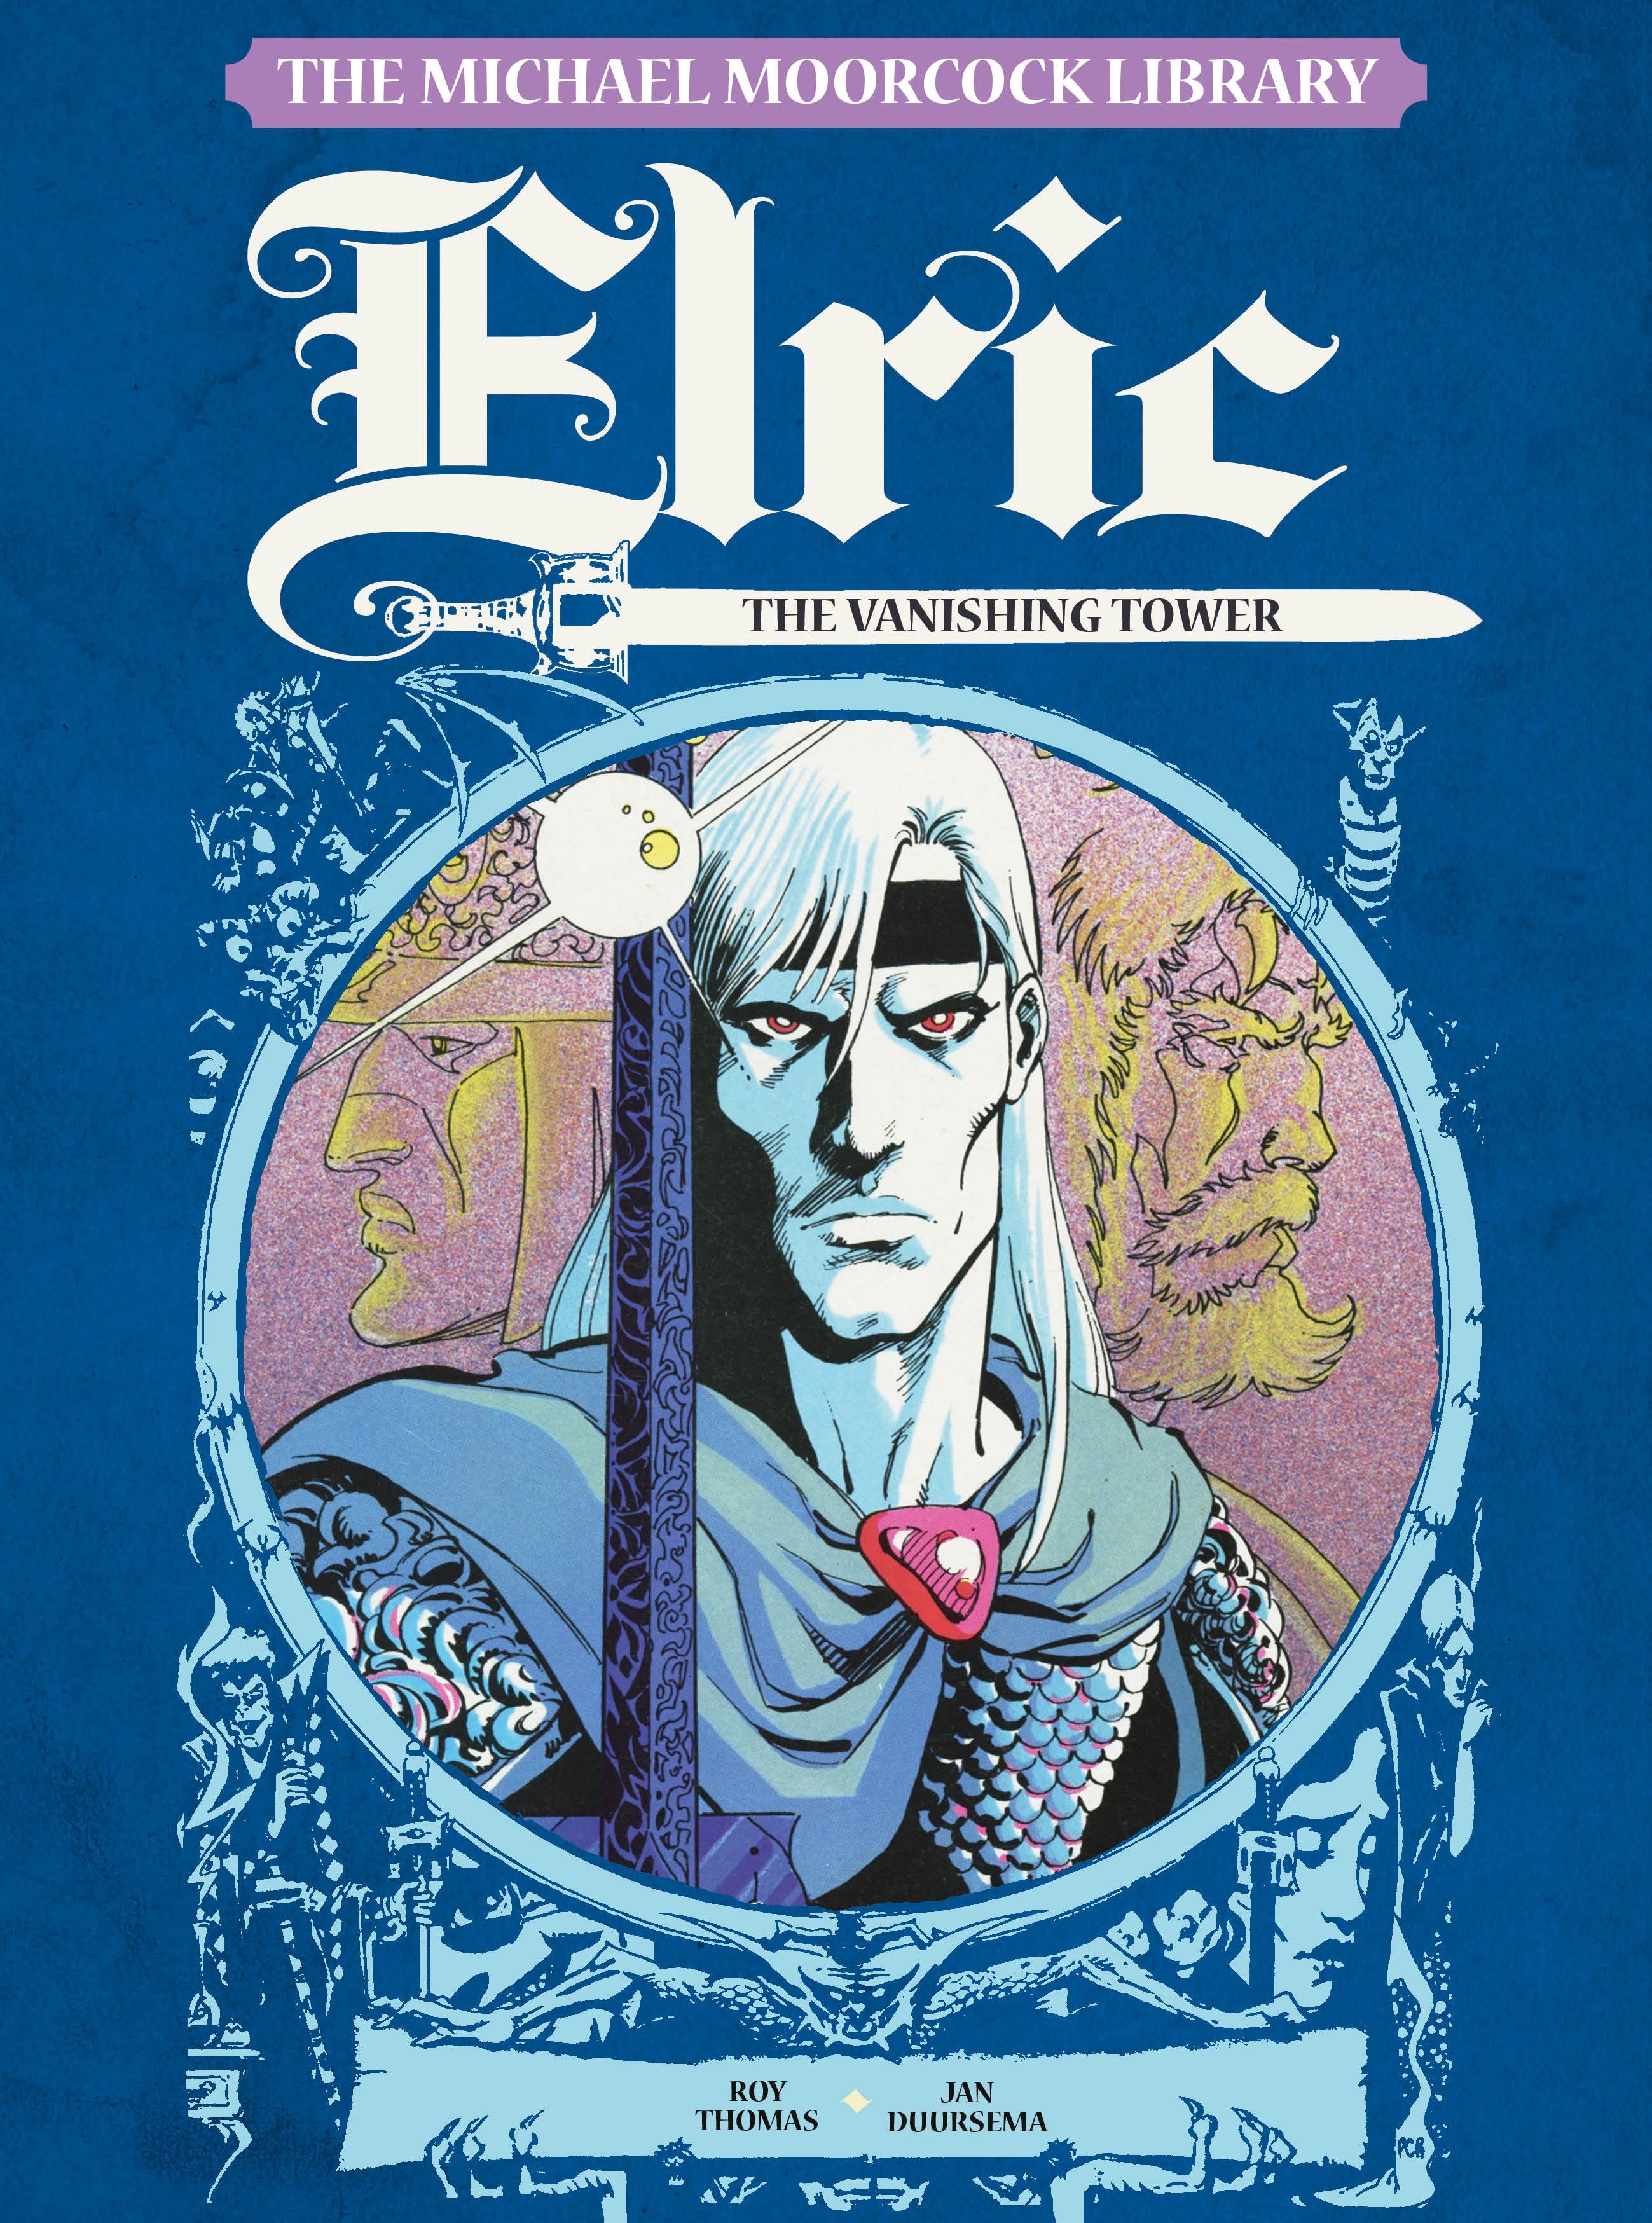 The Michael Moorcock Library: Elric The Vanishing Tower